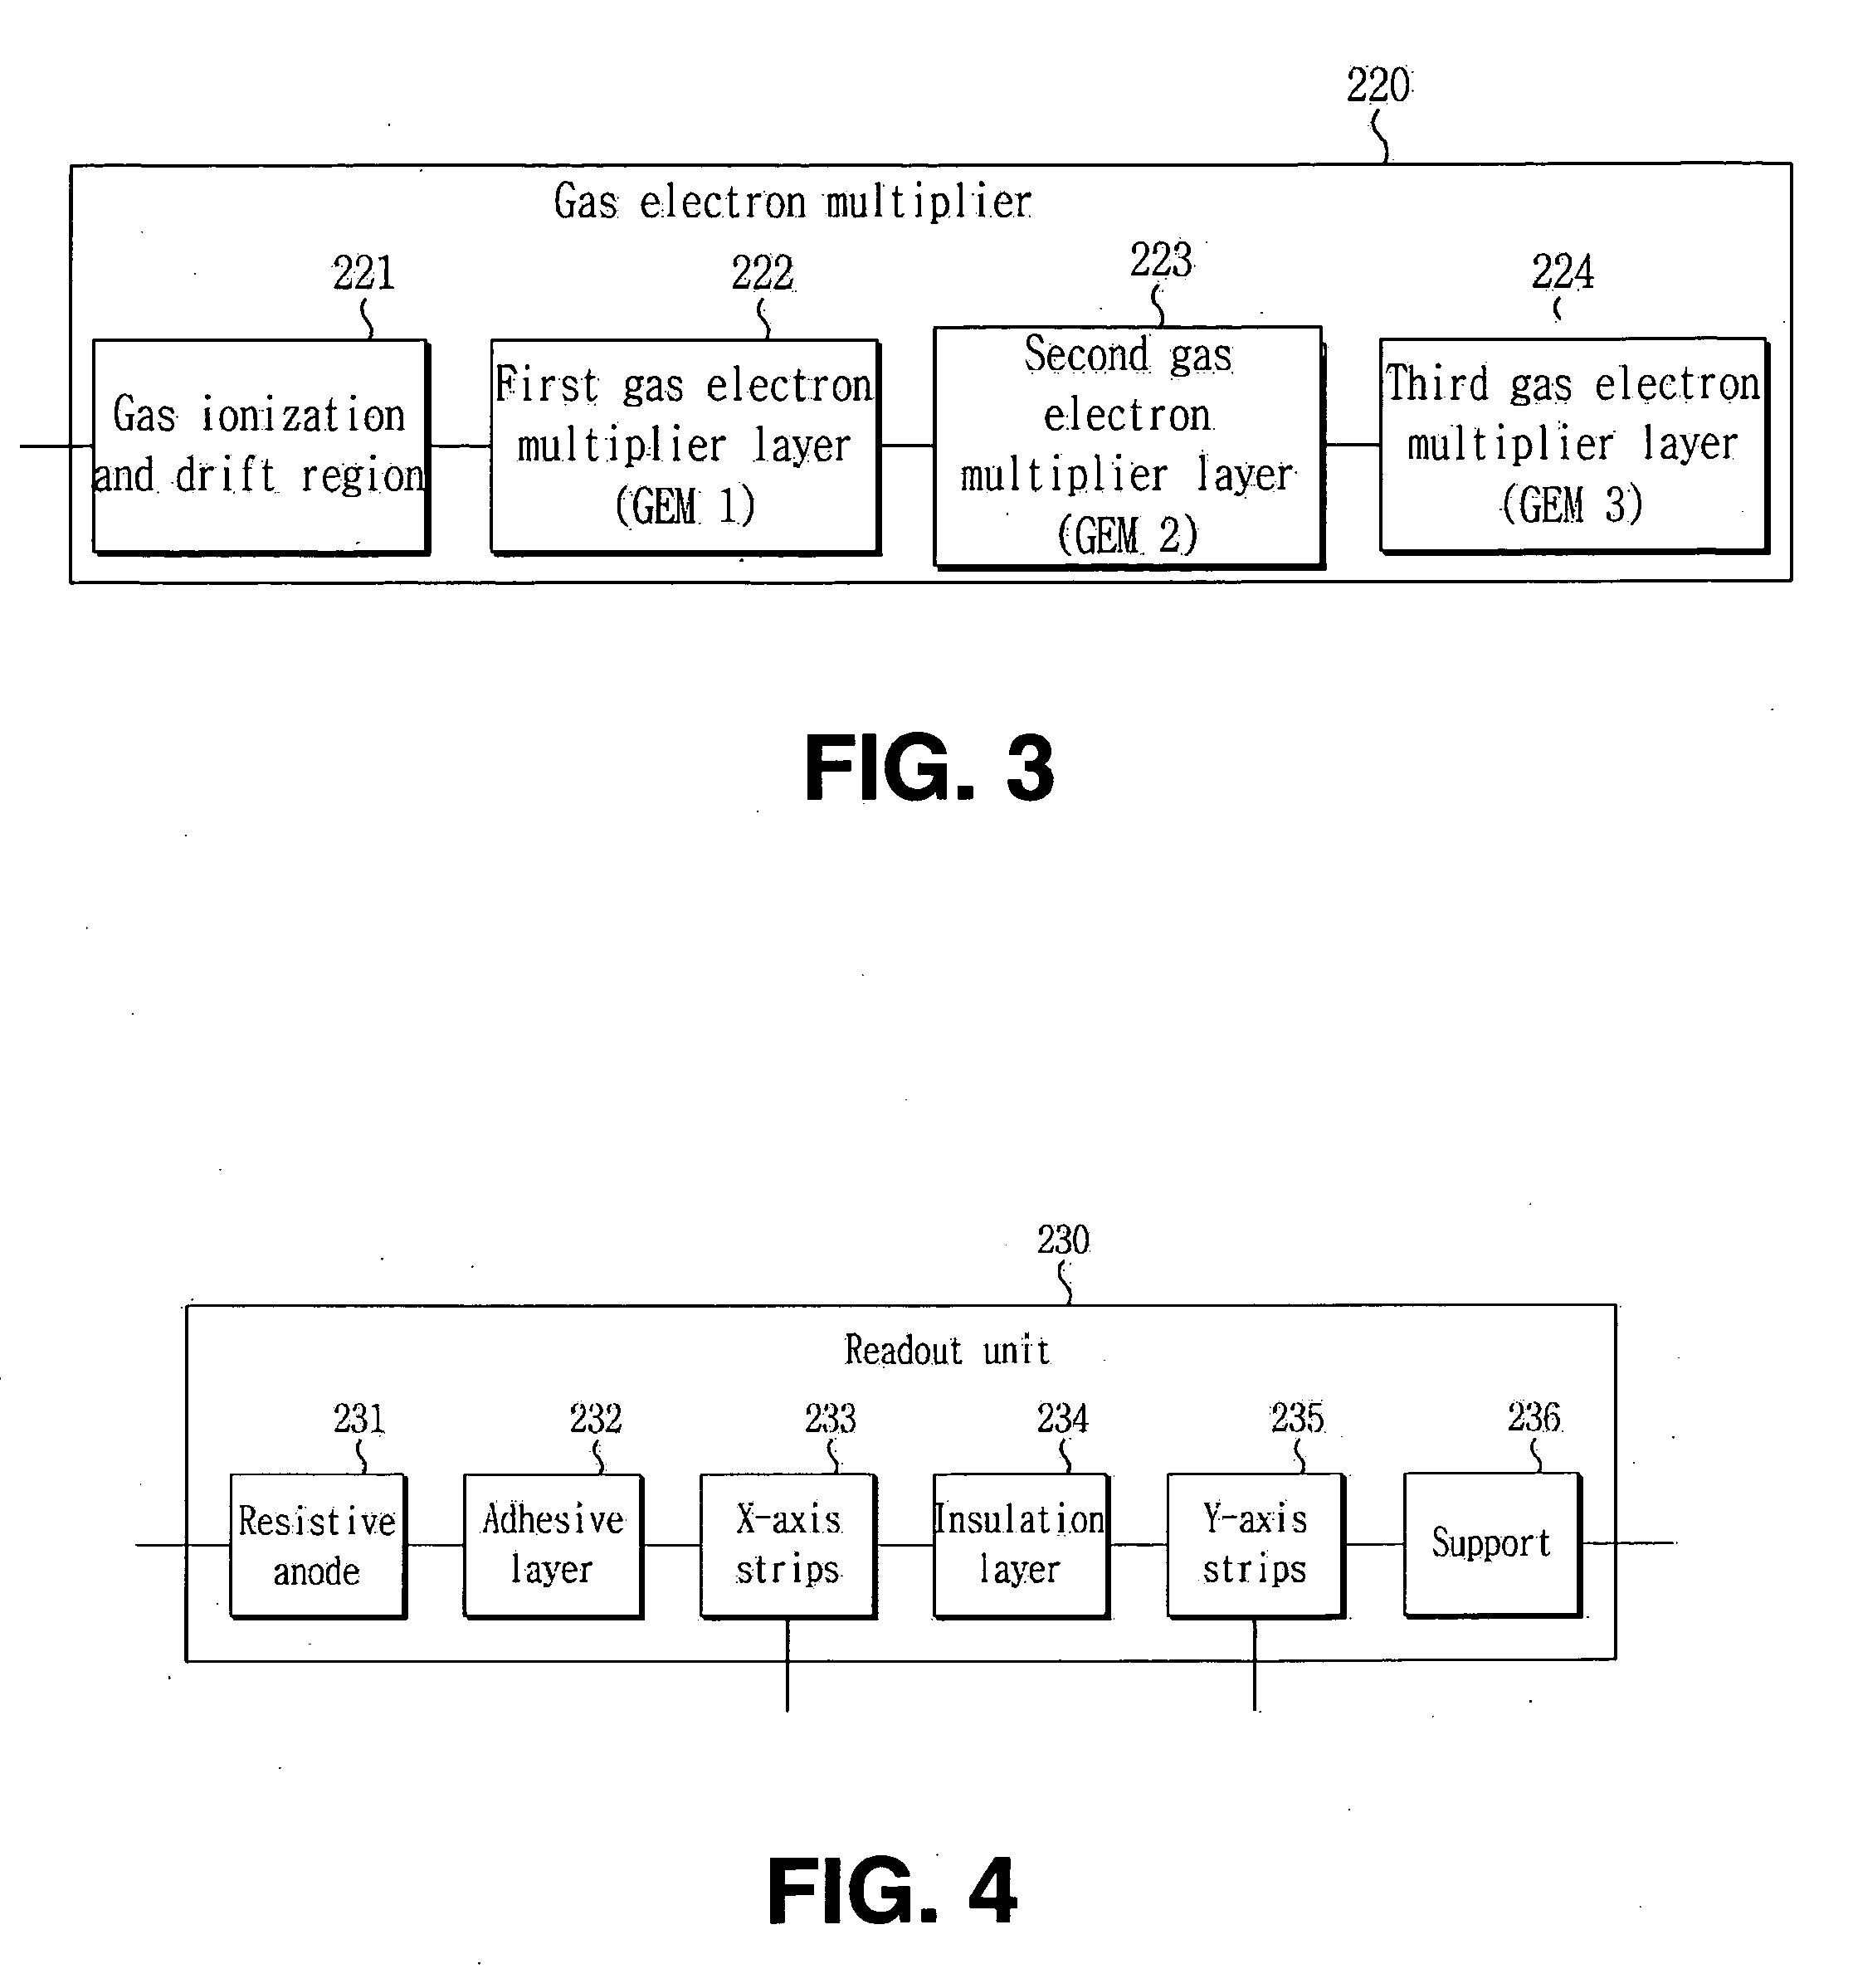 Apparatus for Digital Imaging Photodetector Using Gas Electron Multiplier